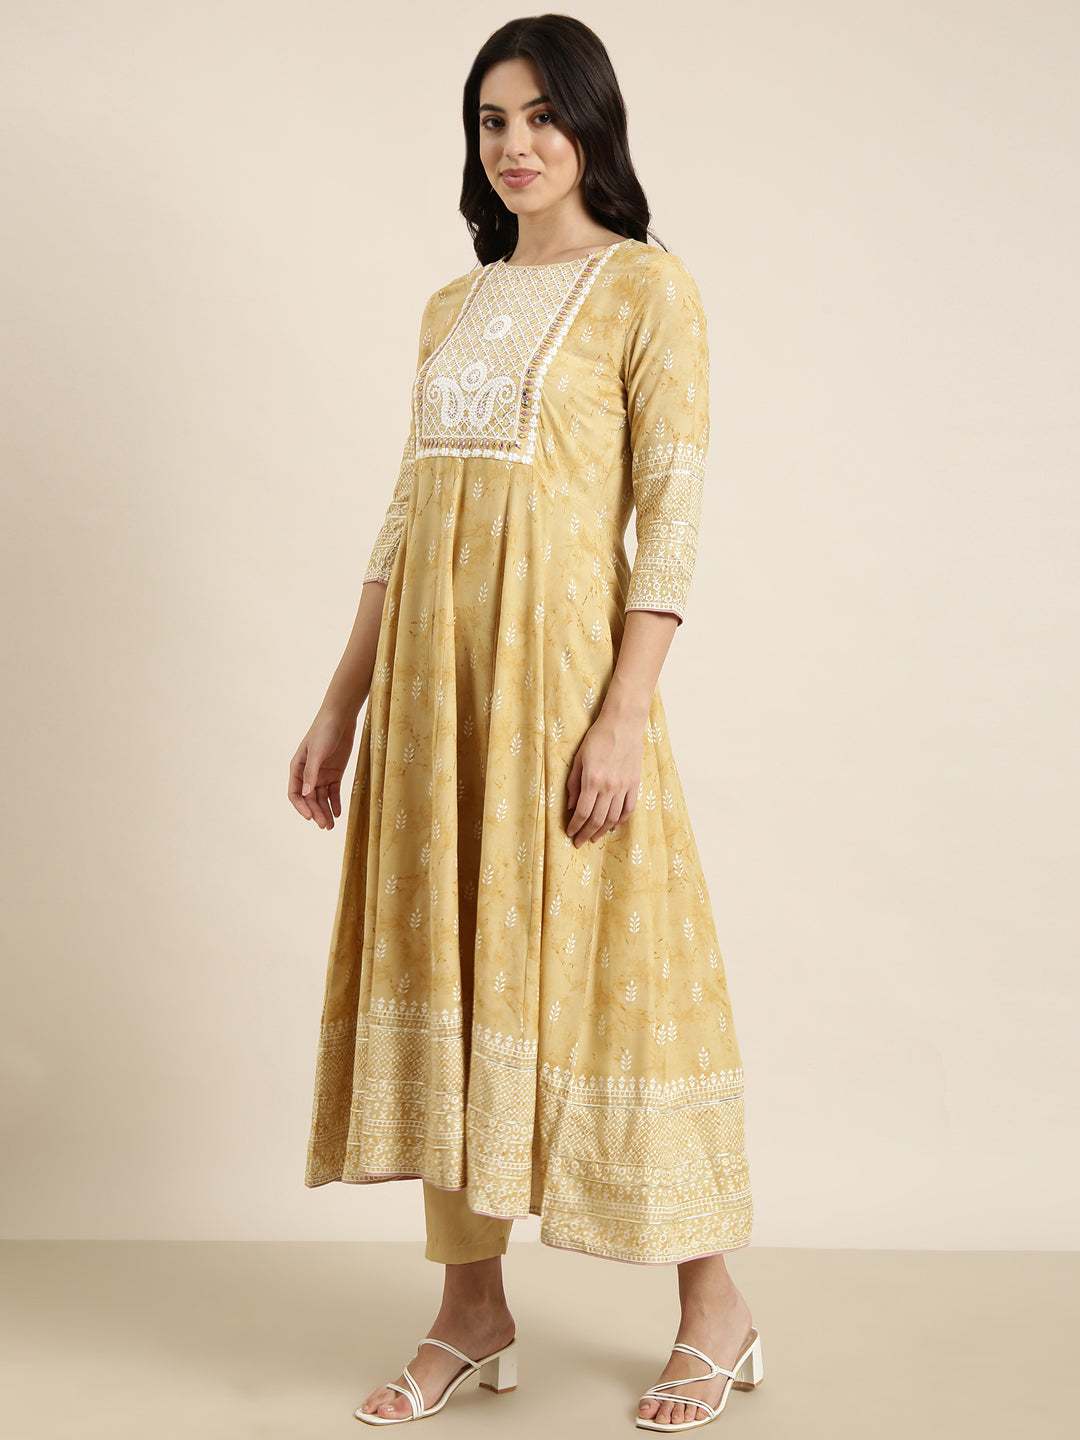 Women Anarkali Beige Floral Kurta and Trousers Set Comes With Dupatta